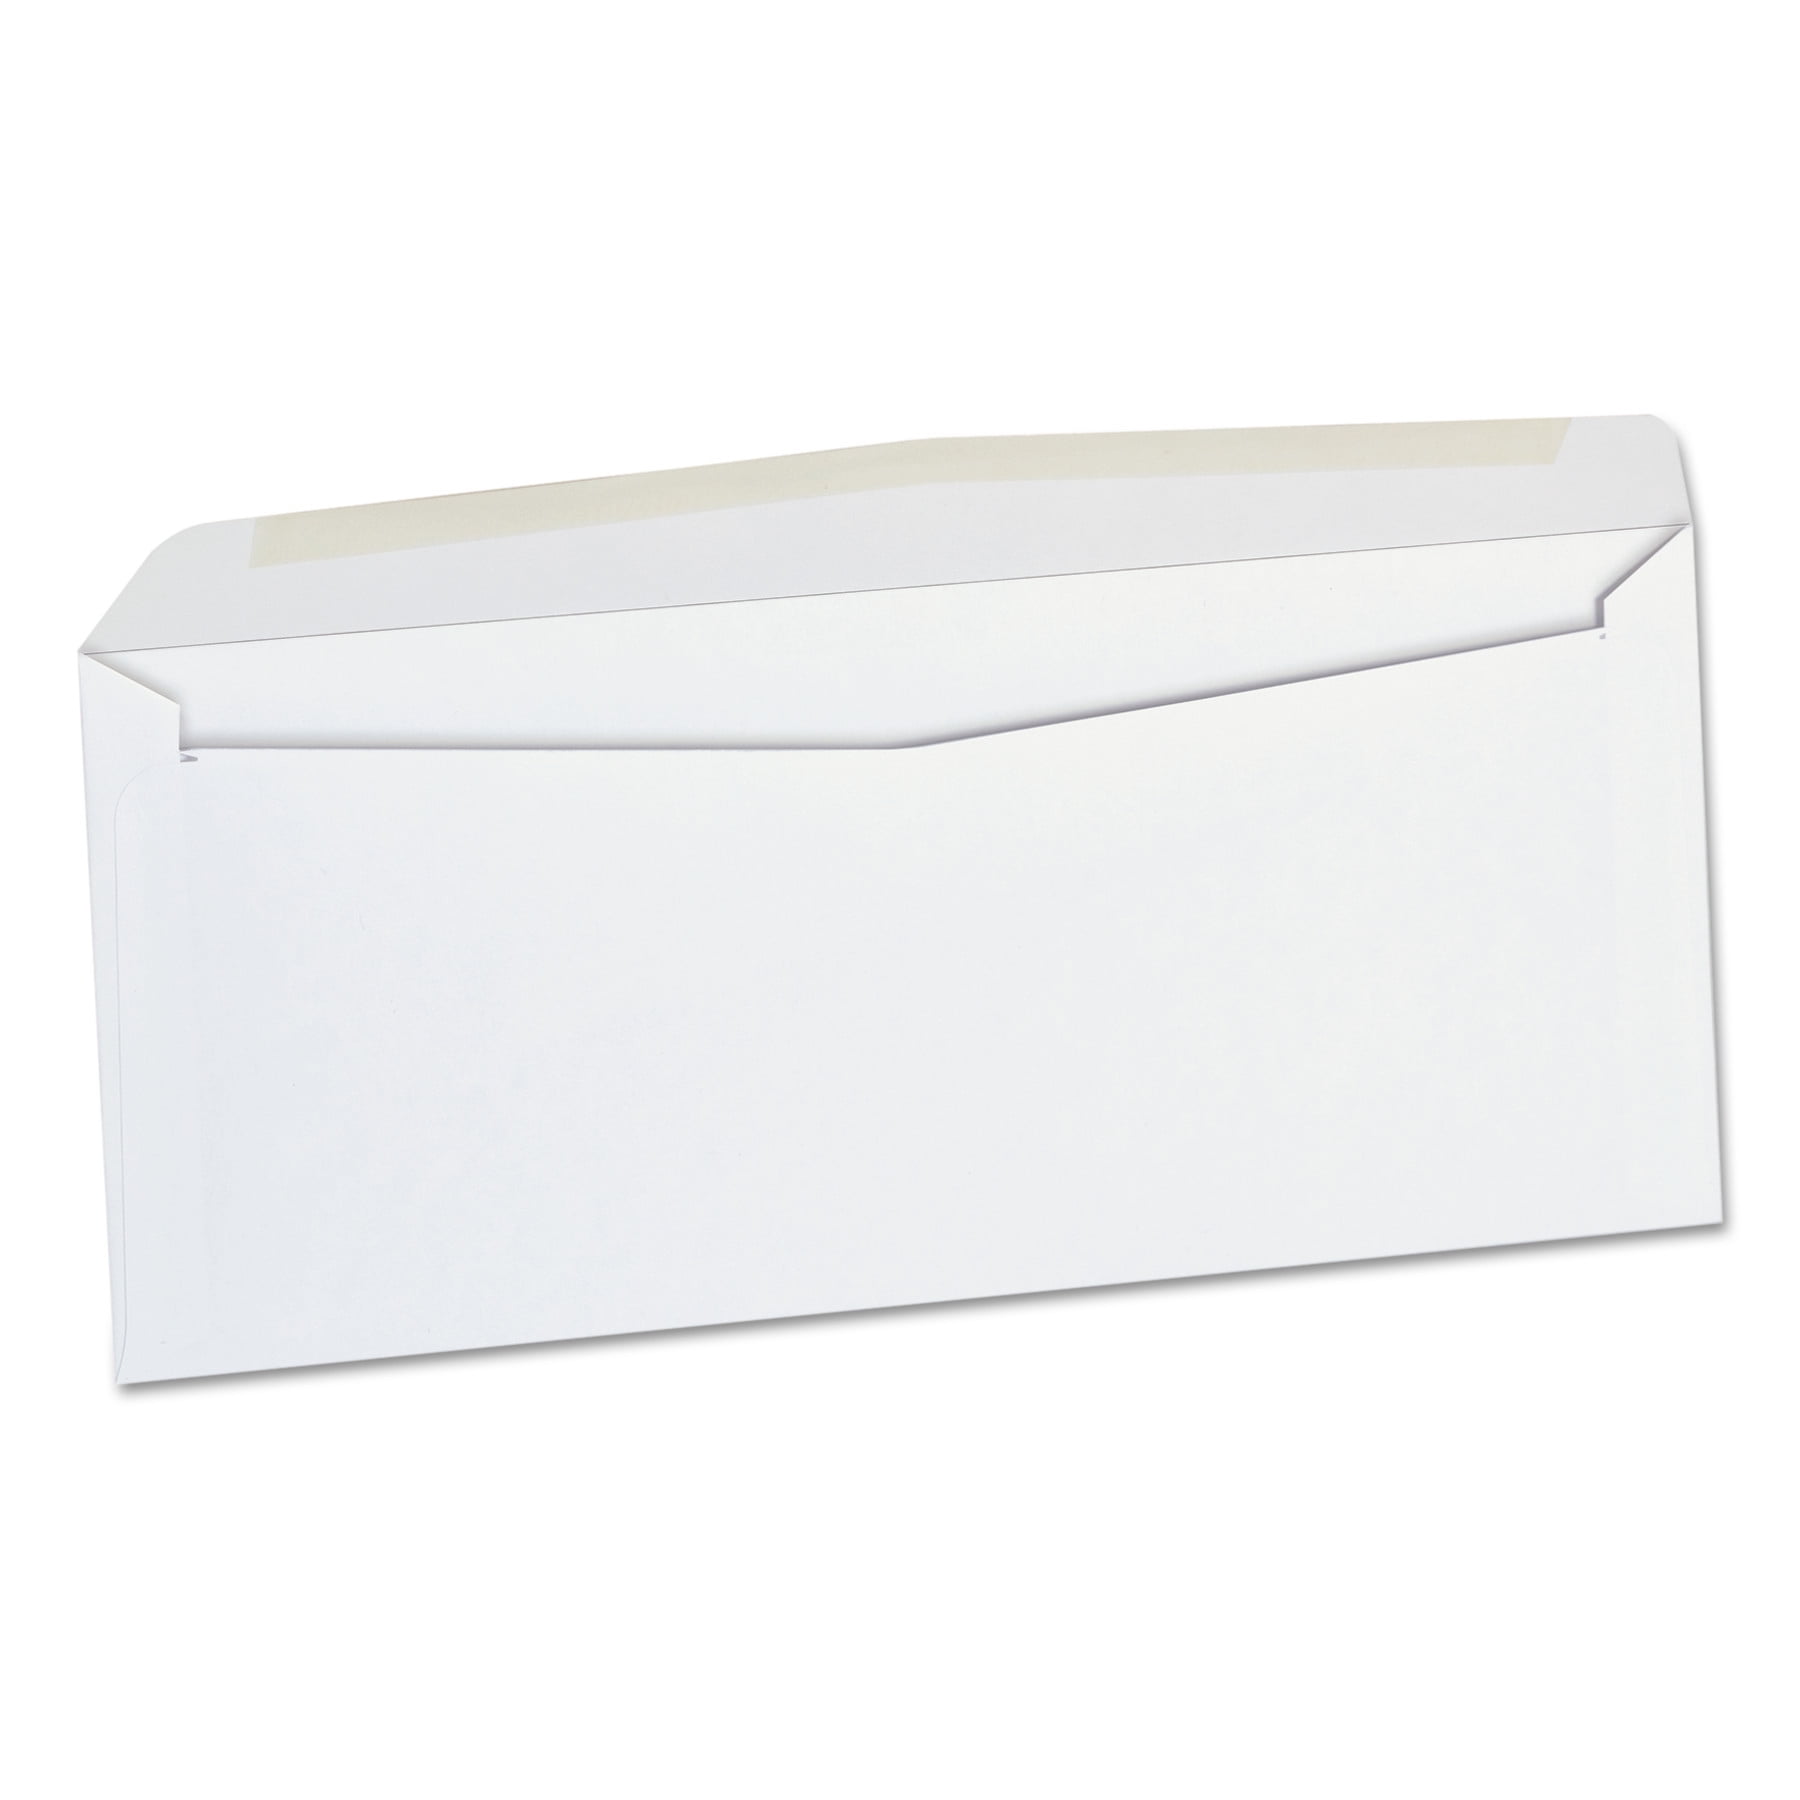 - White Gift Cards Product Information #63 Mini Envelope with Grommet Directions |EN6303-50 and more 50 Qty. 2 1/2 x 4 1/4 | Perfect for the Holidays 